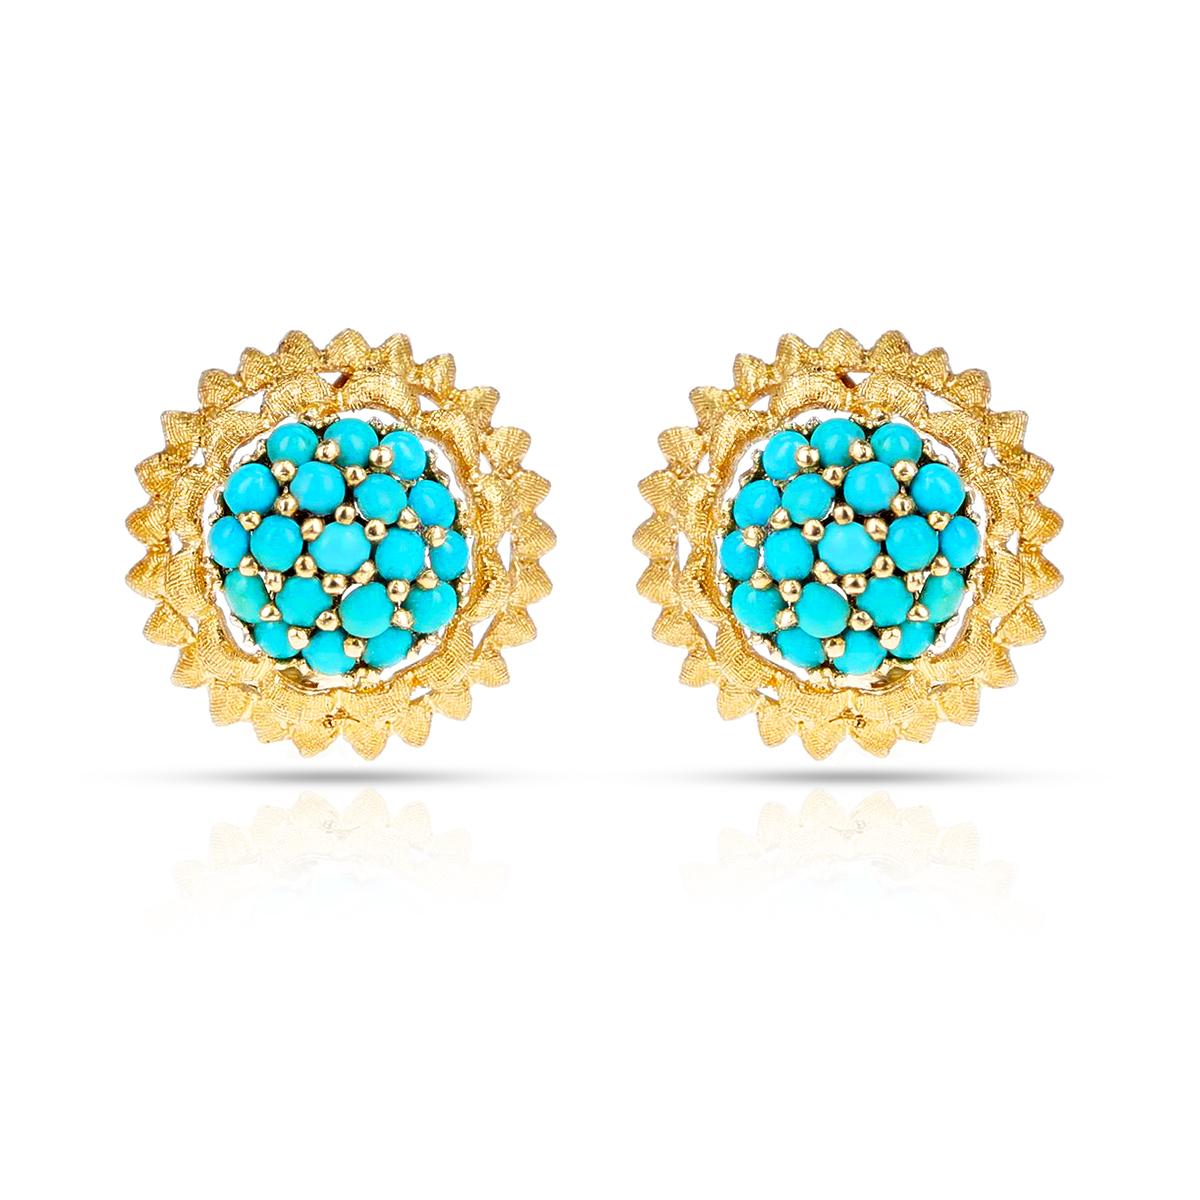 A beautiful pair of Floral Earrings with a cluster of Turquoise Cabochons in the center. The earrings are made in 14 Karat Yellow Gold. 